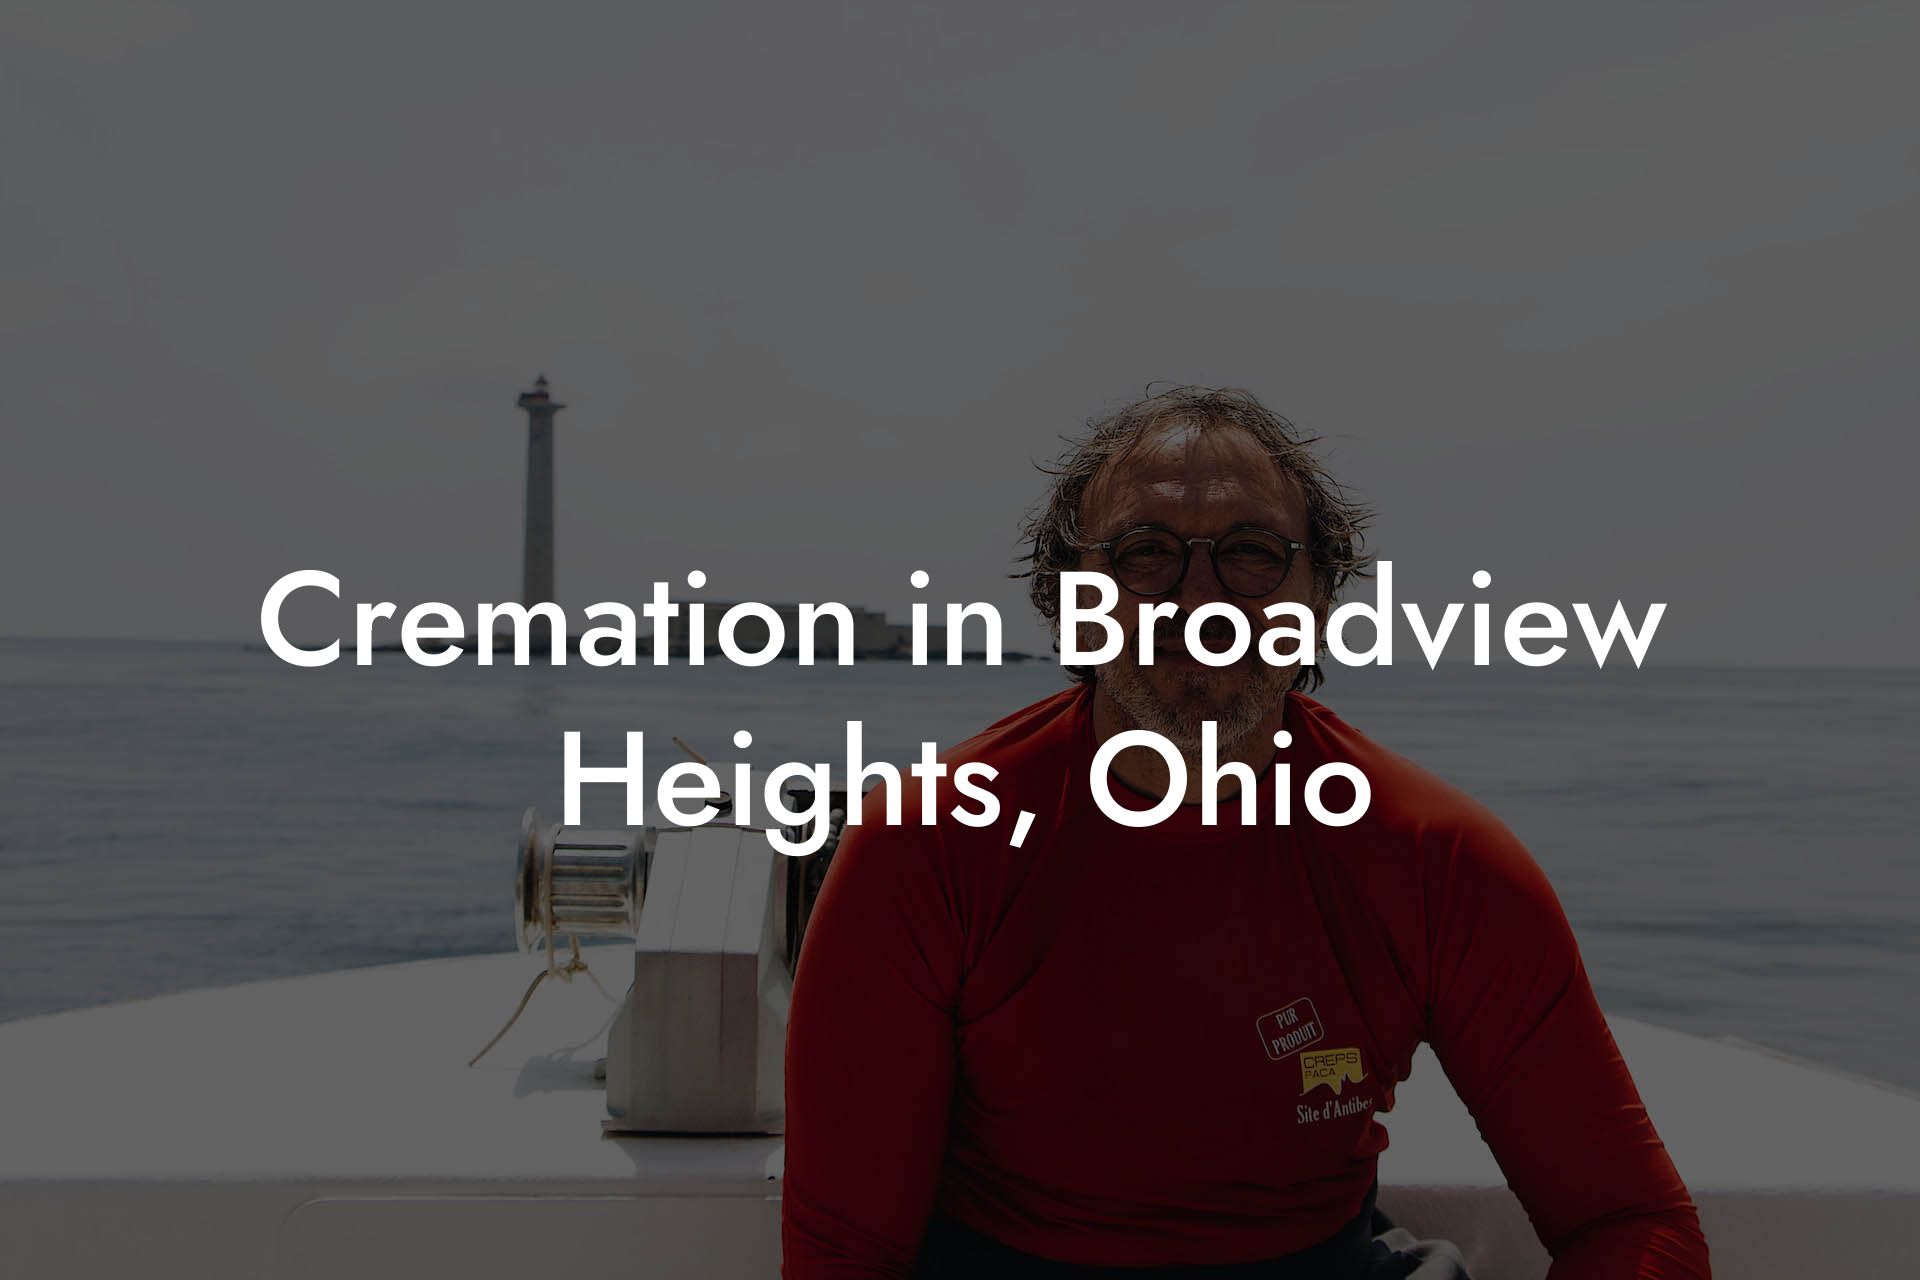 Cremation in Broadview Heights, Ohio